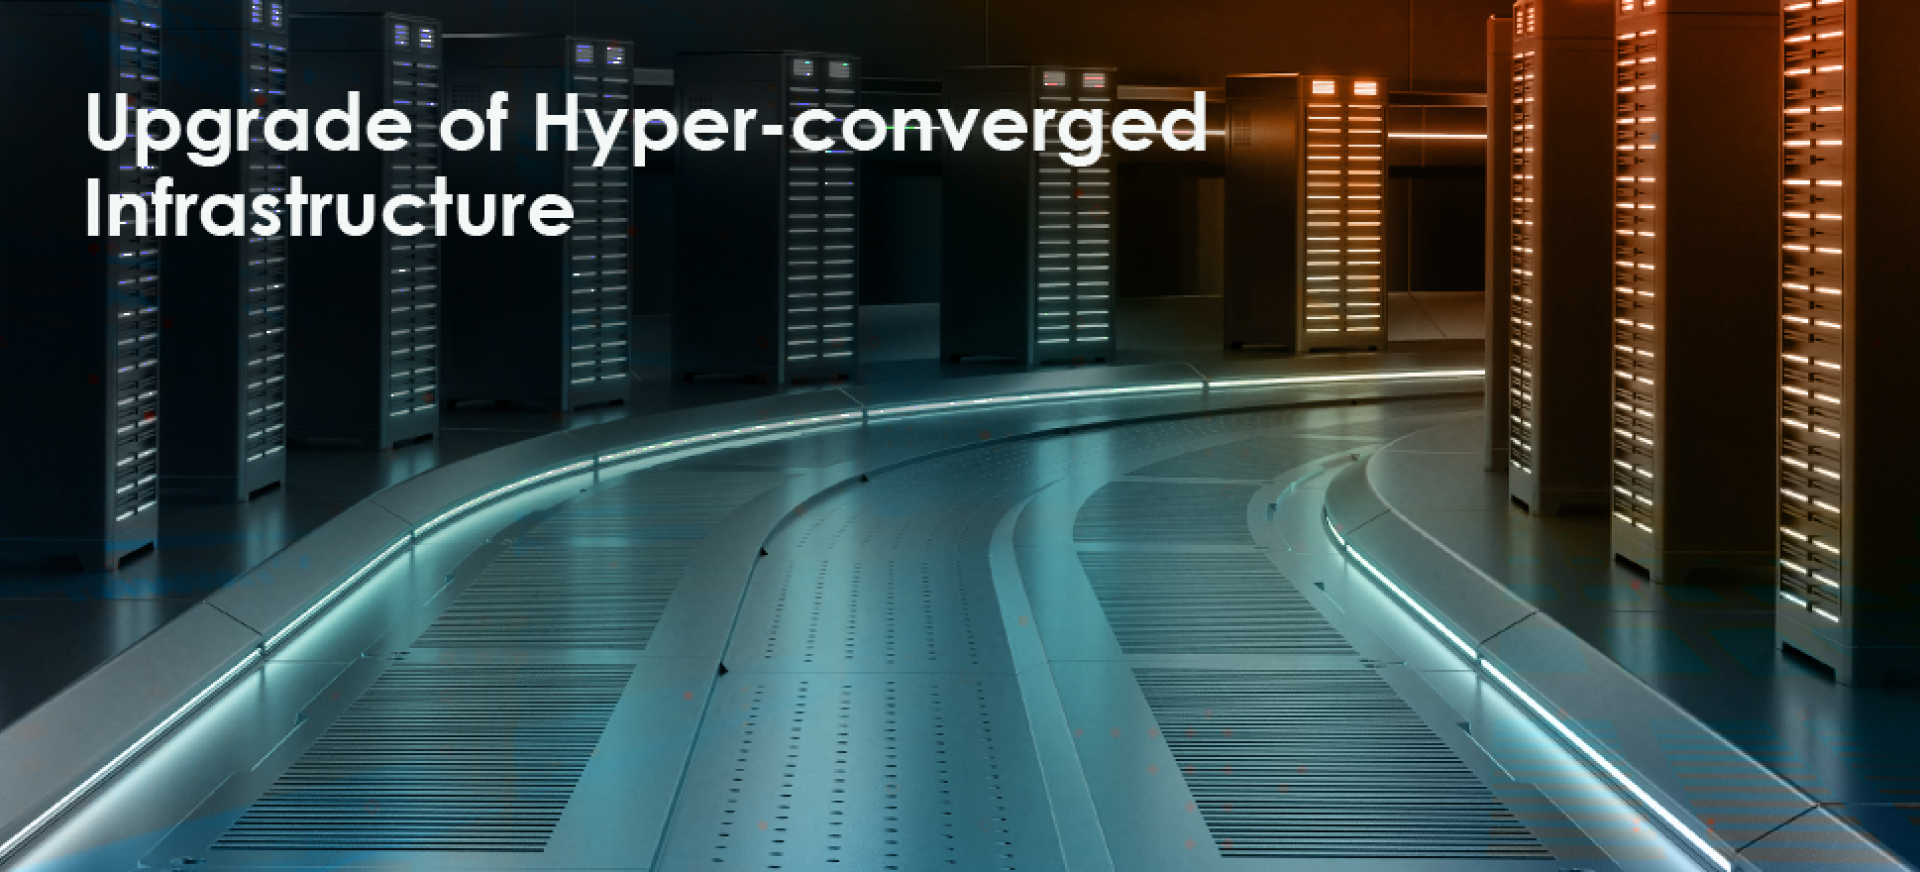 Upgrade of Hyper-converged Infrastructure